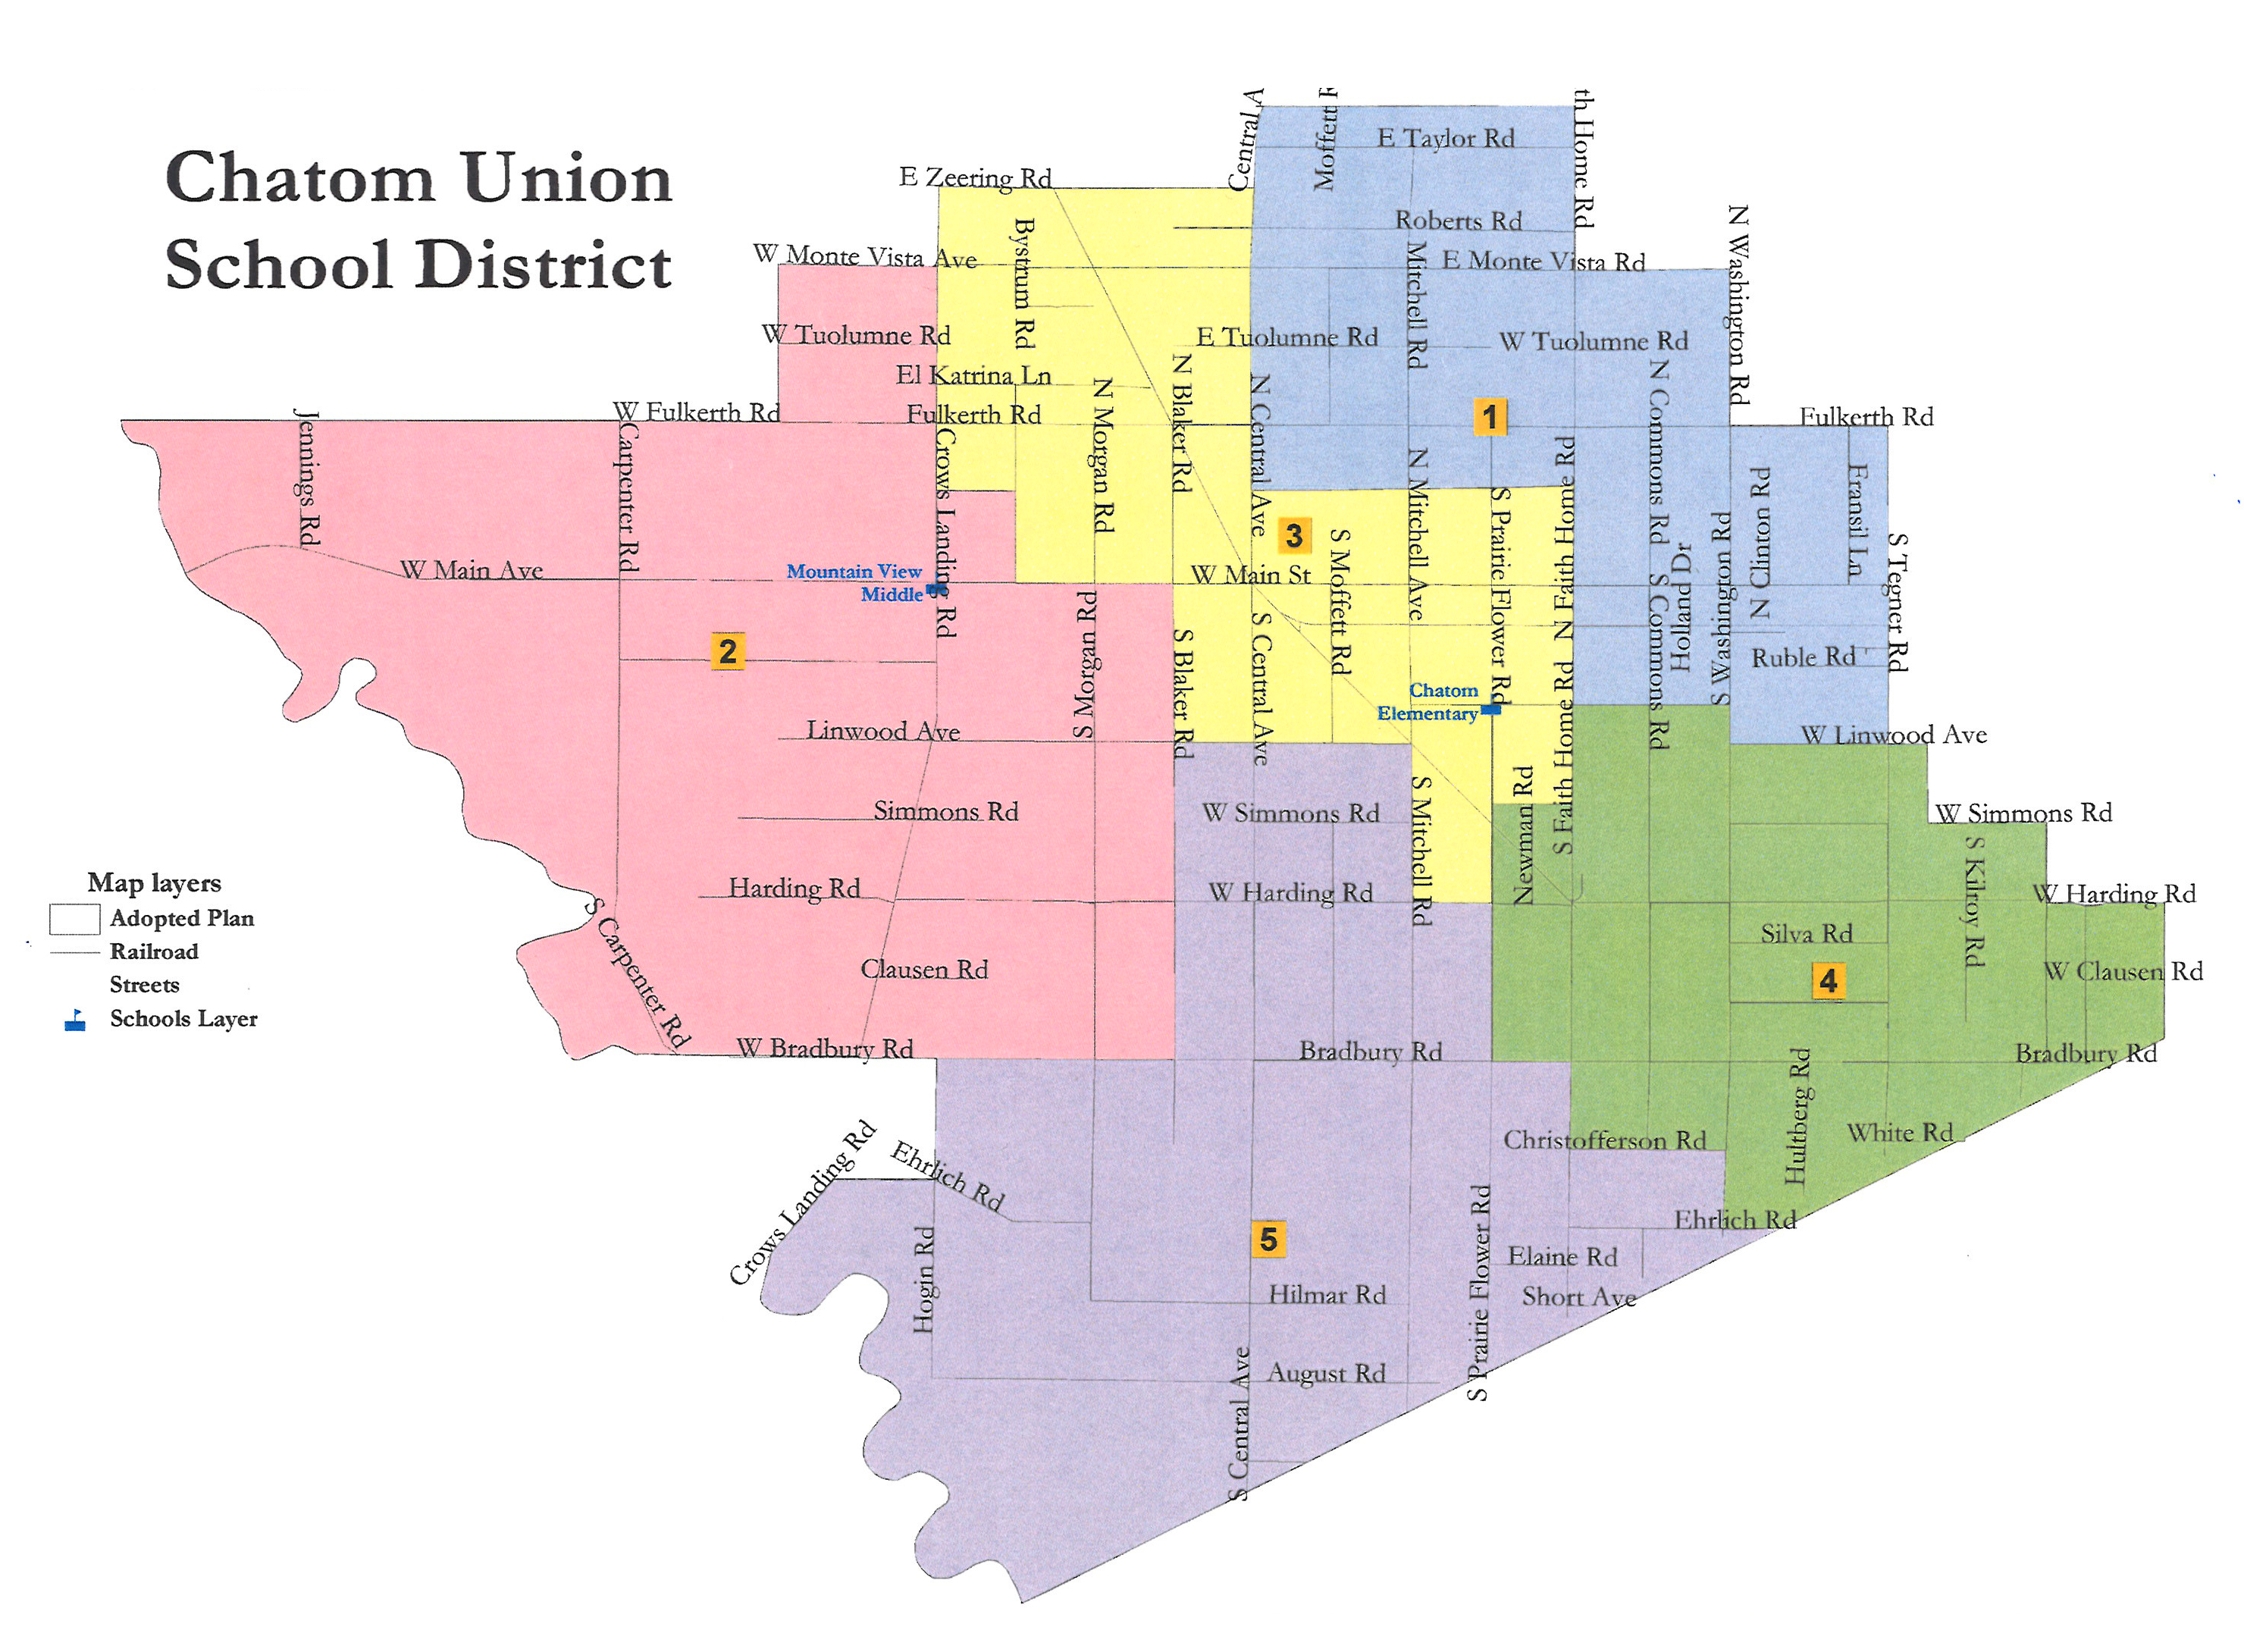 Chatom School District Boundary and Board Member Areas